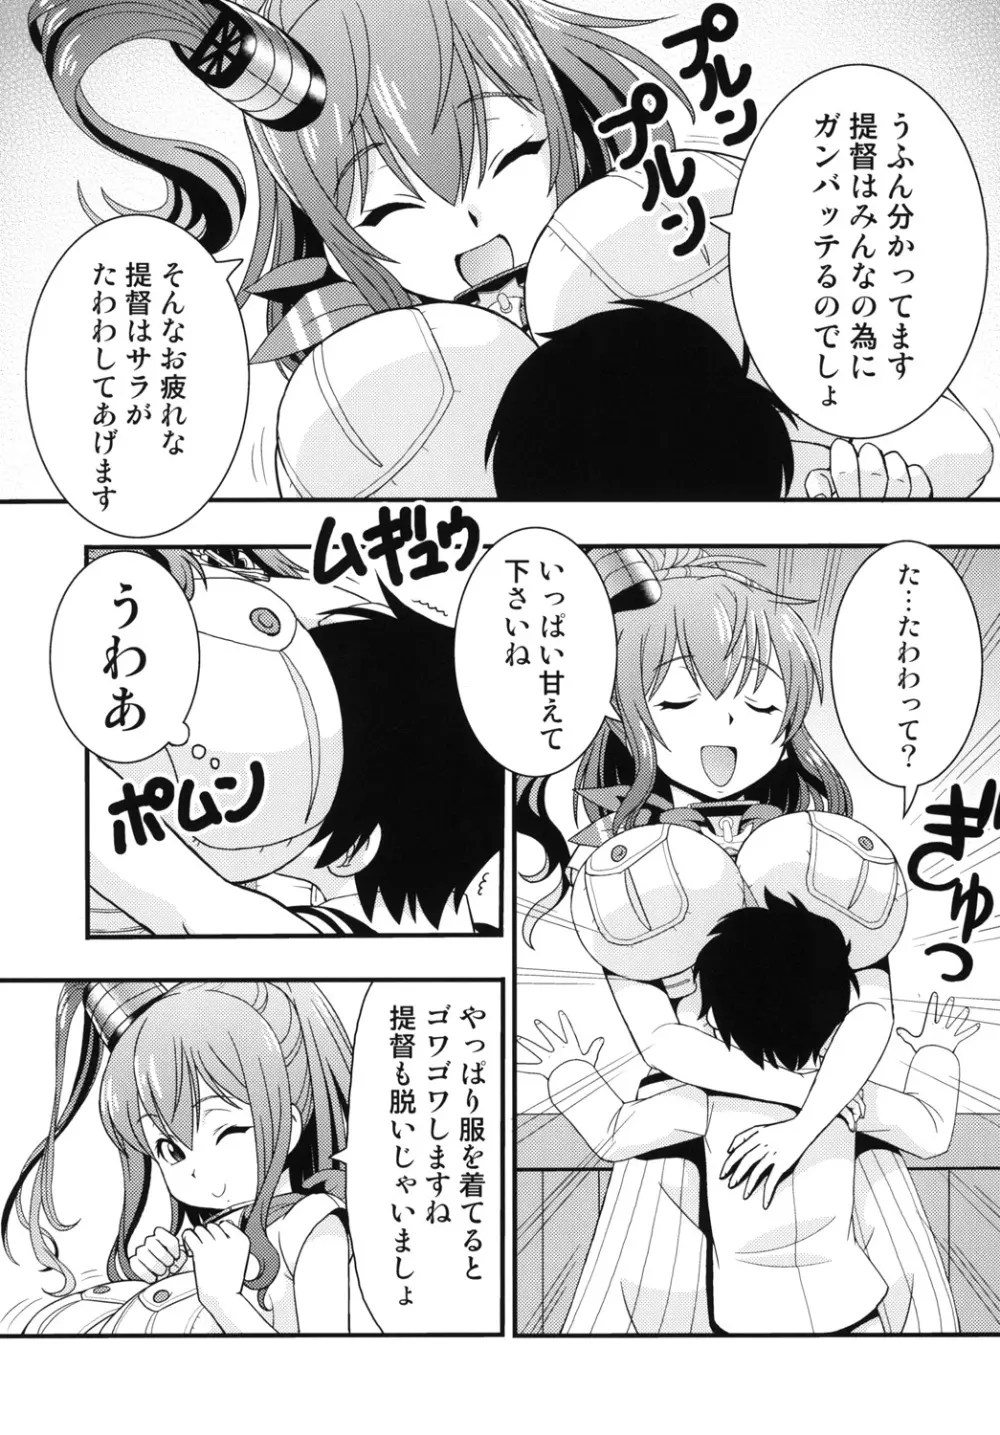 ITOYOKO SELECTION 14 鹿島・サラトガ - page20